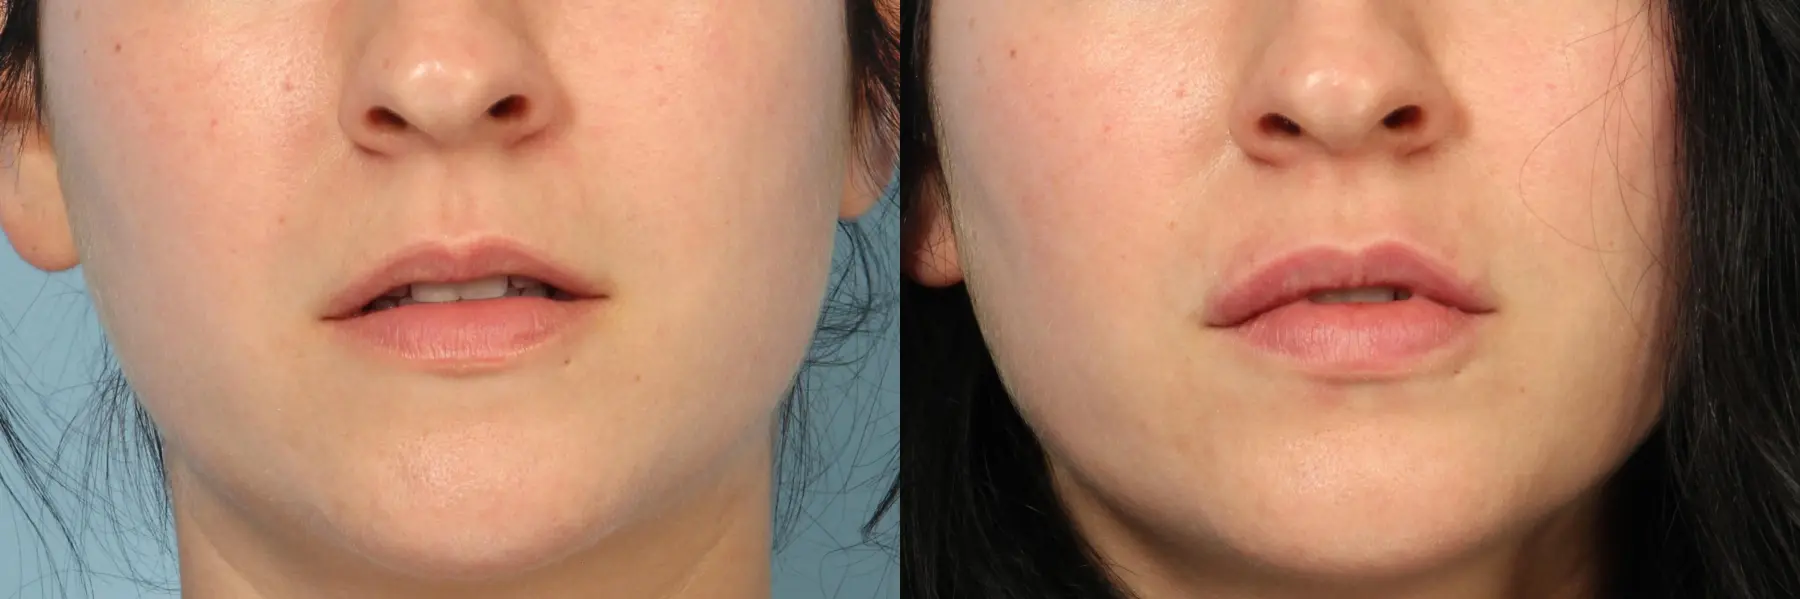 Fillers: Patient 2 - Before and After 1